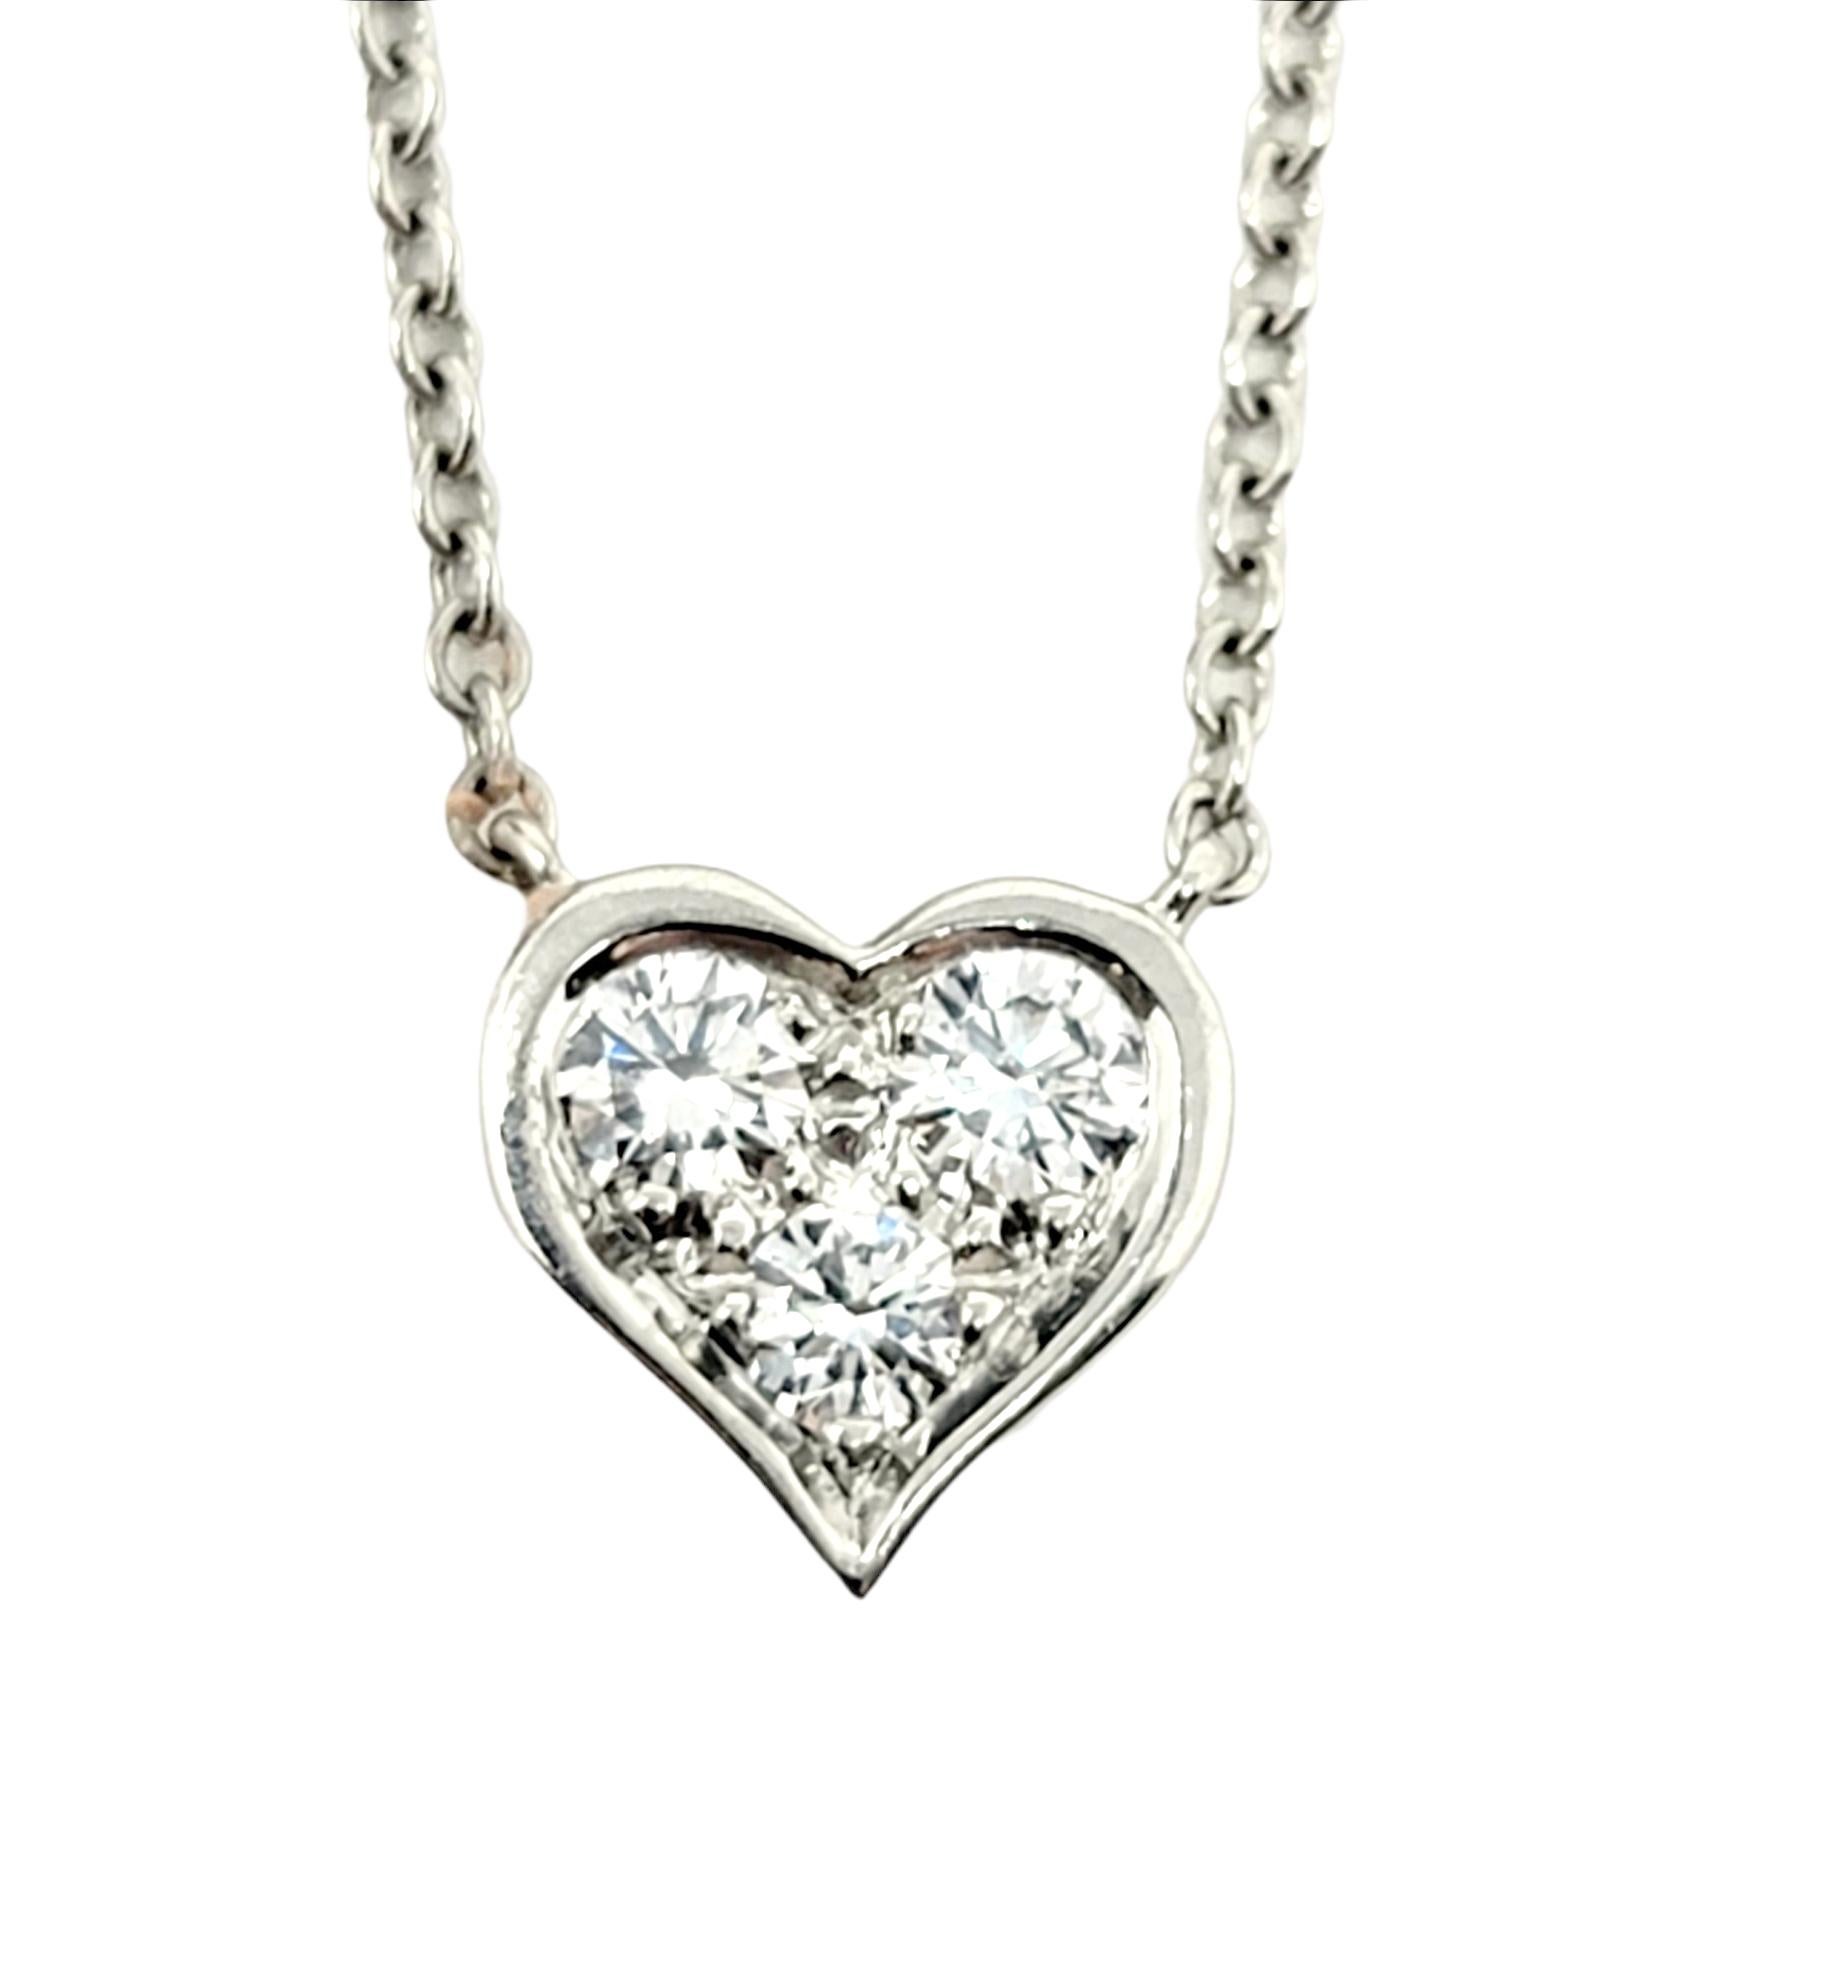 The diamond heart pendant necklace from Tiffany & Co. is stunningly simple, yet undeniably beautiful. Featuring a delicate platinum chain and an icy trio of natural round diamonds, this necklace goes with just about everything. It features 3 round